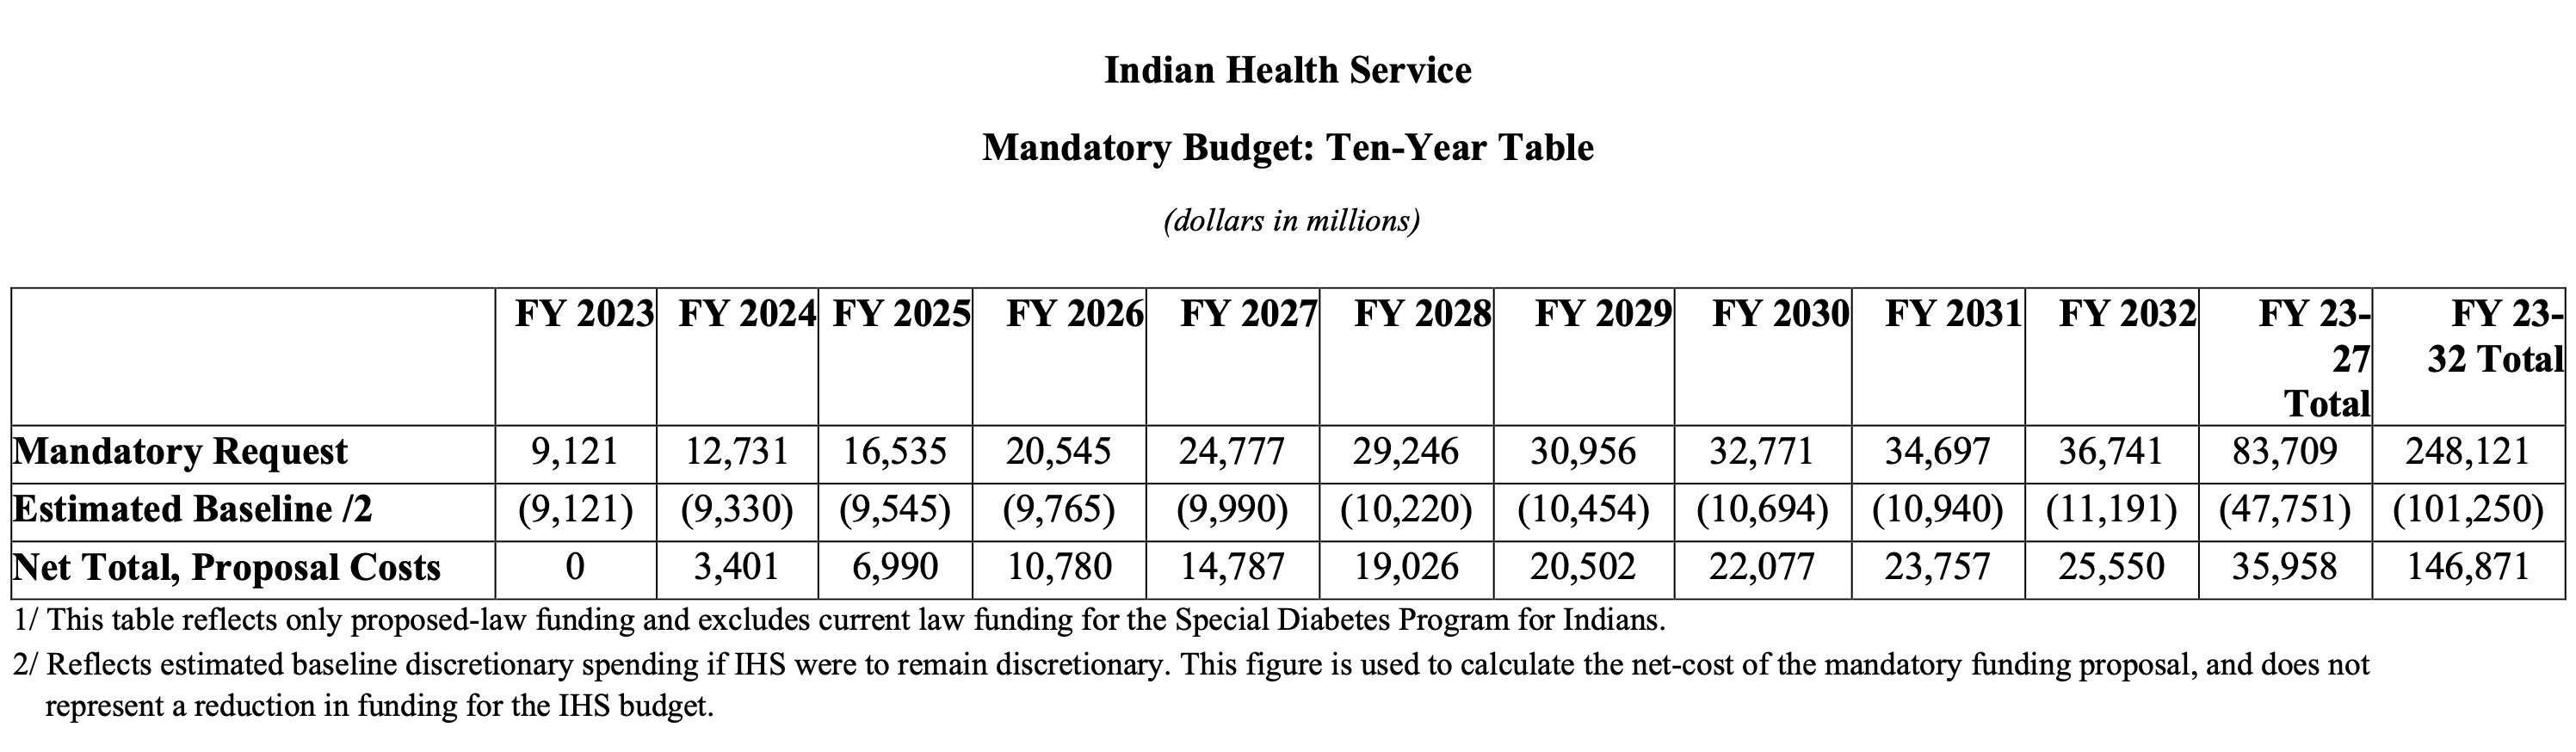 Indian Health Service Mandatory Budget: Ten-Year Table